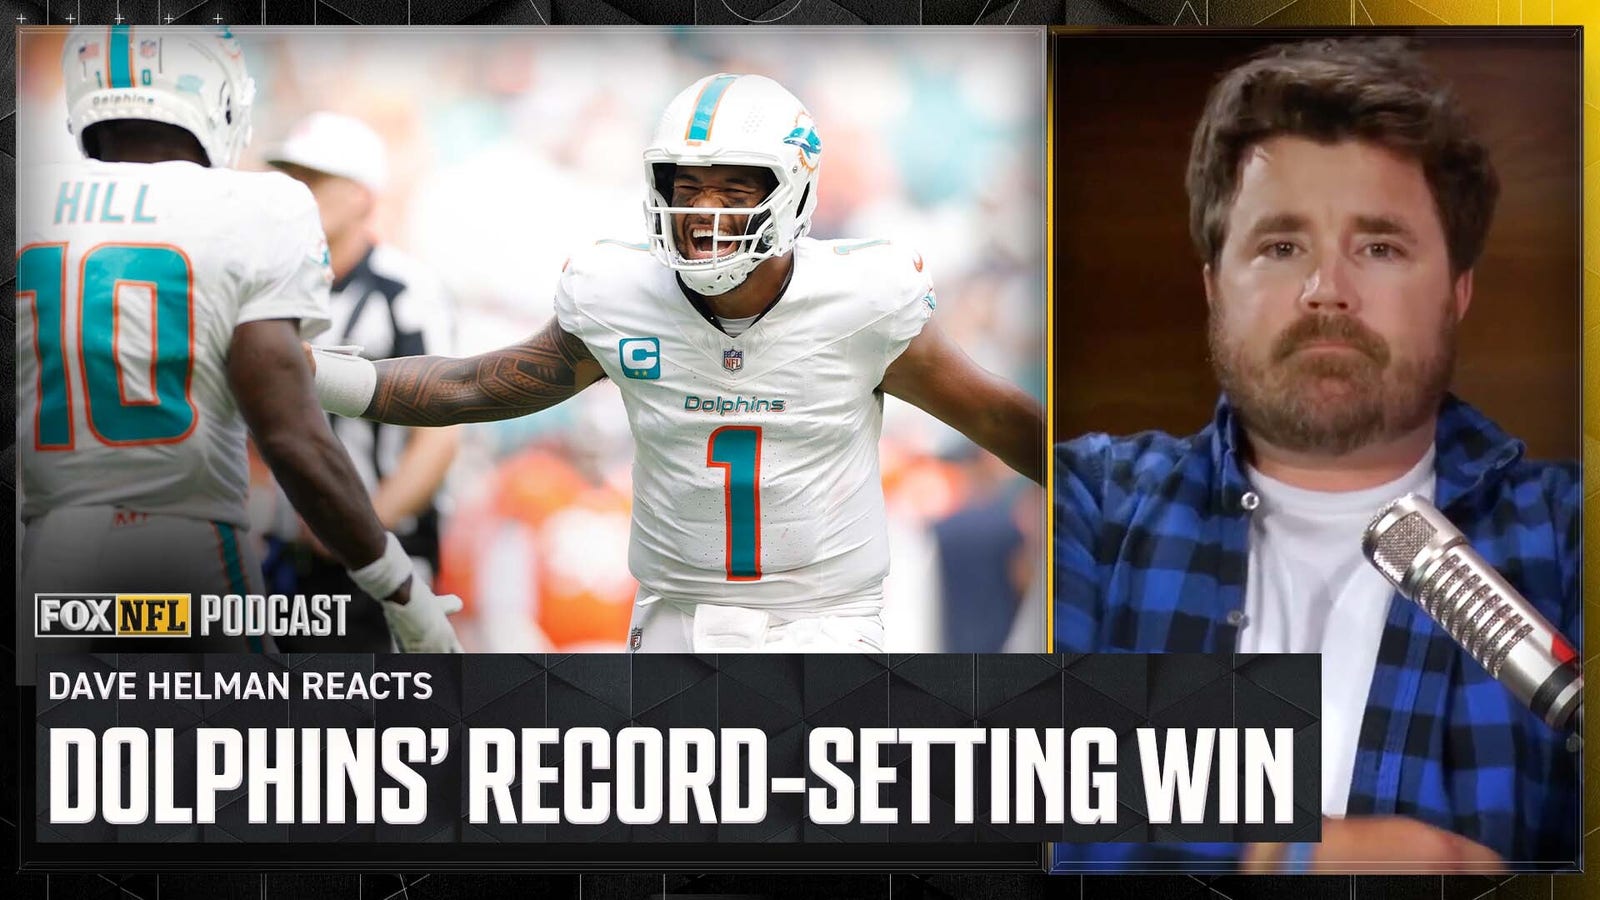 Dave Helman on Dolphins' unreal win over Broncos 